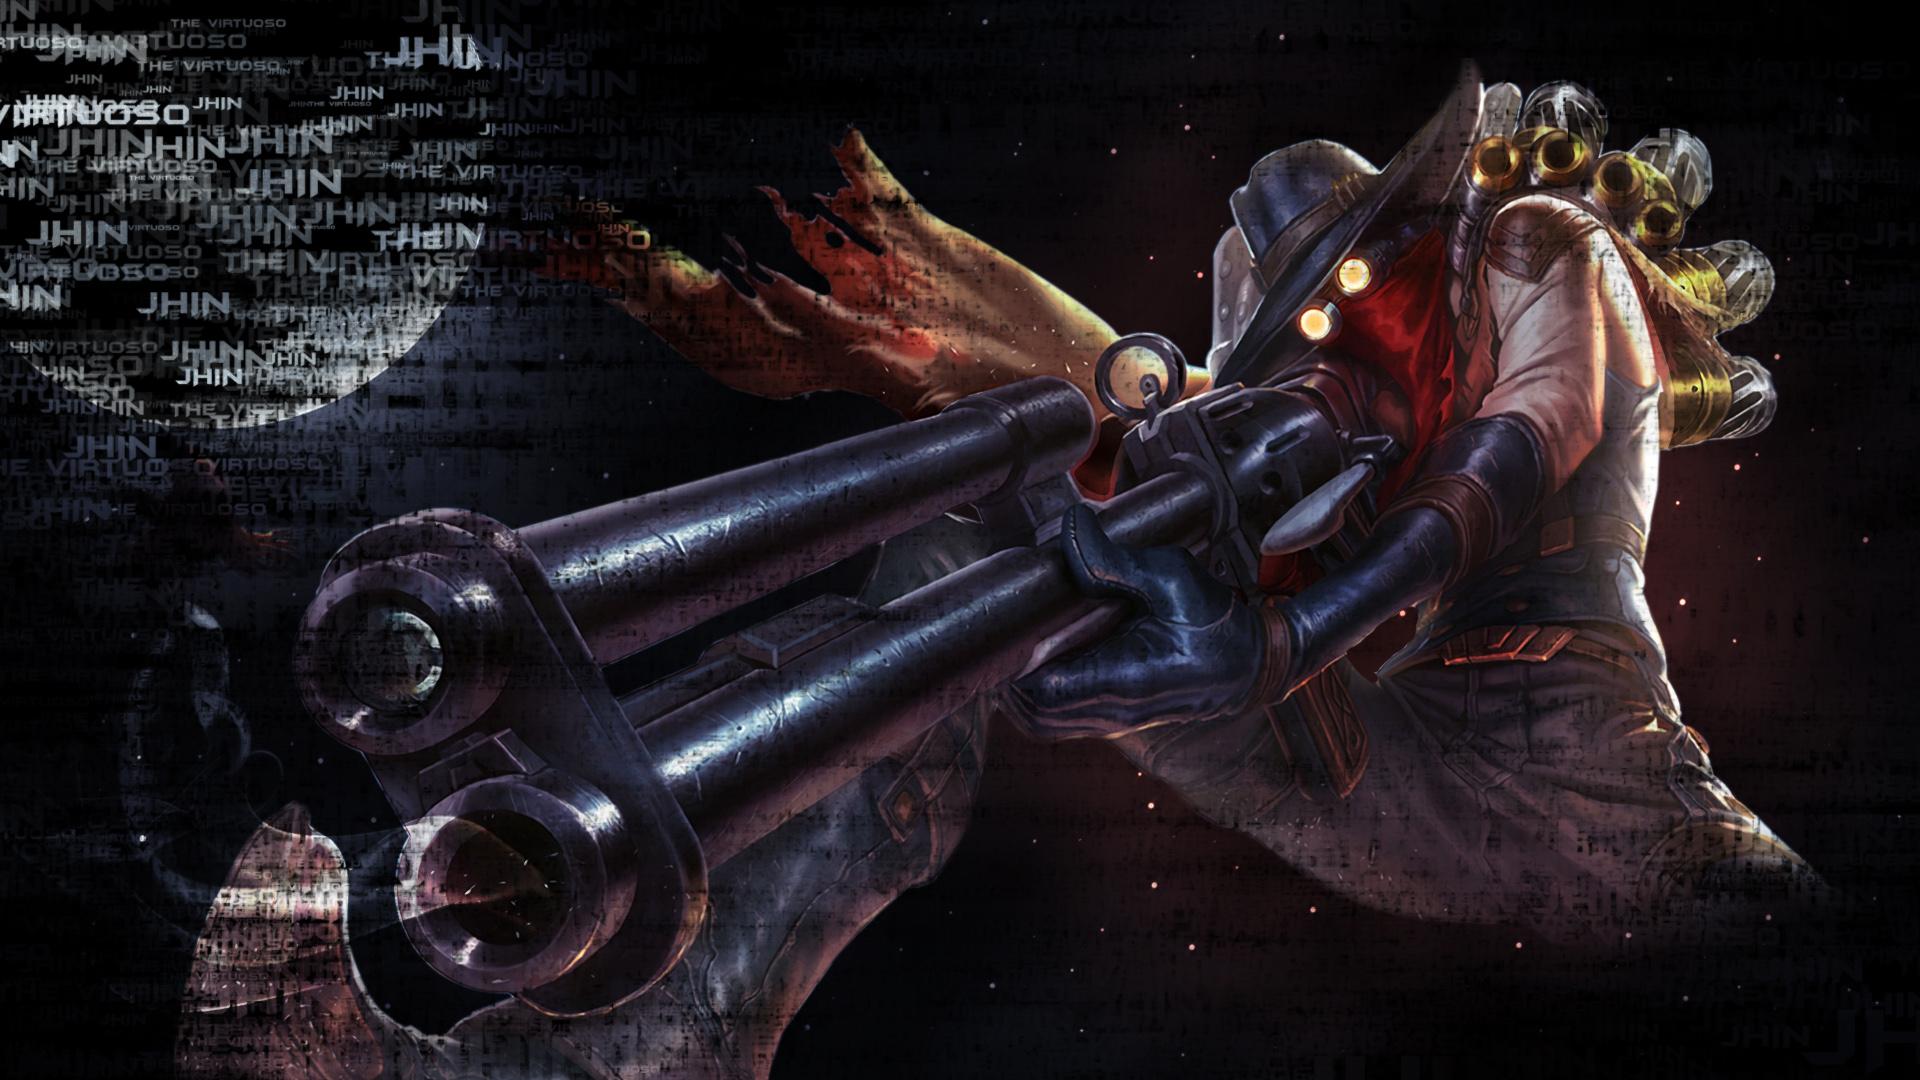 League of Legends : High Noon Jhin for Live Wallpaper purposes on Make a GIF